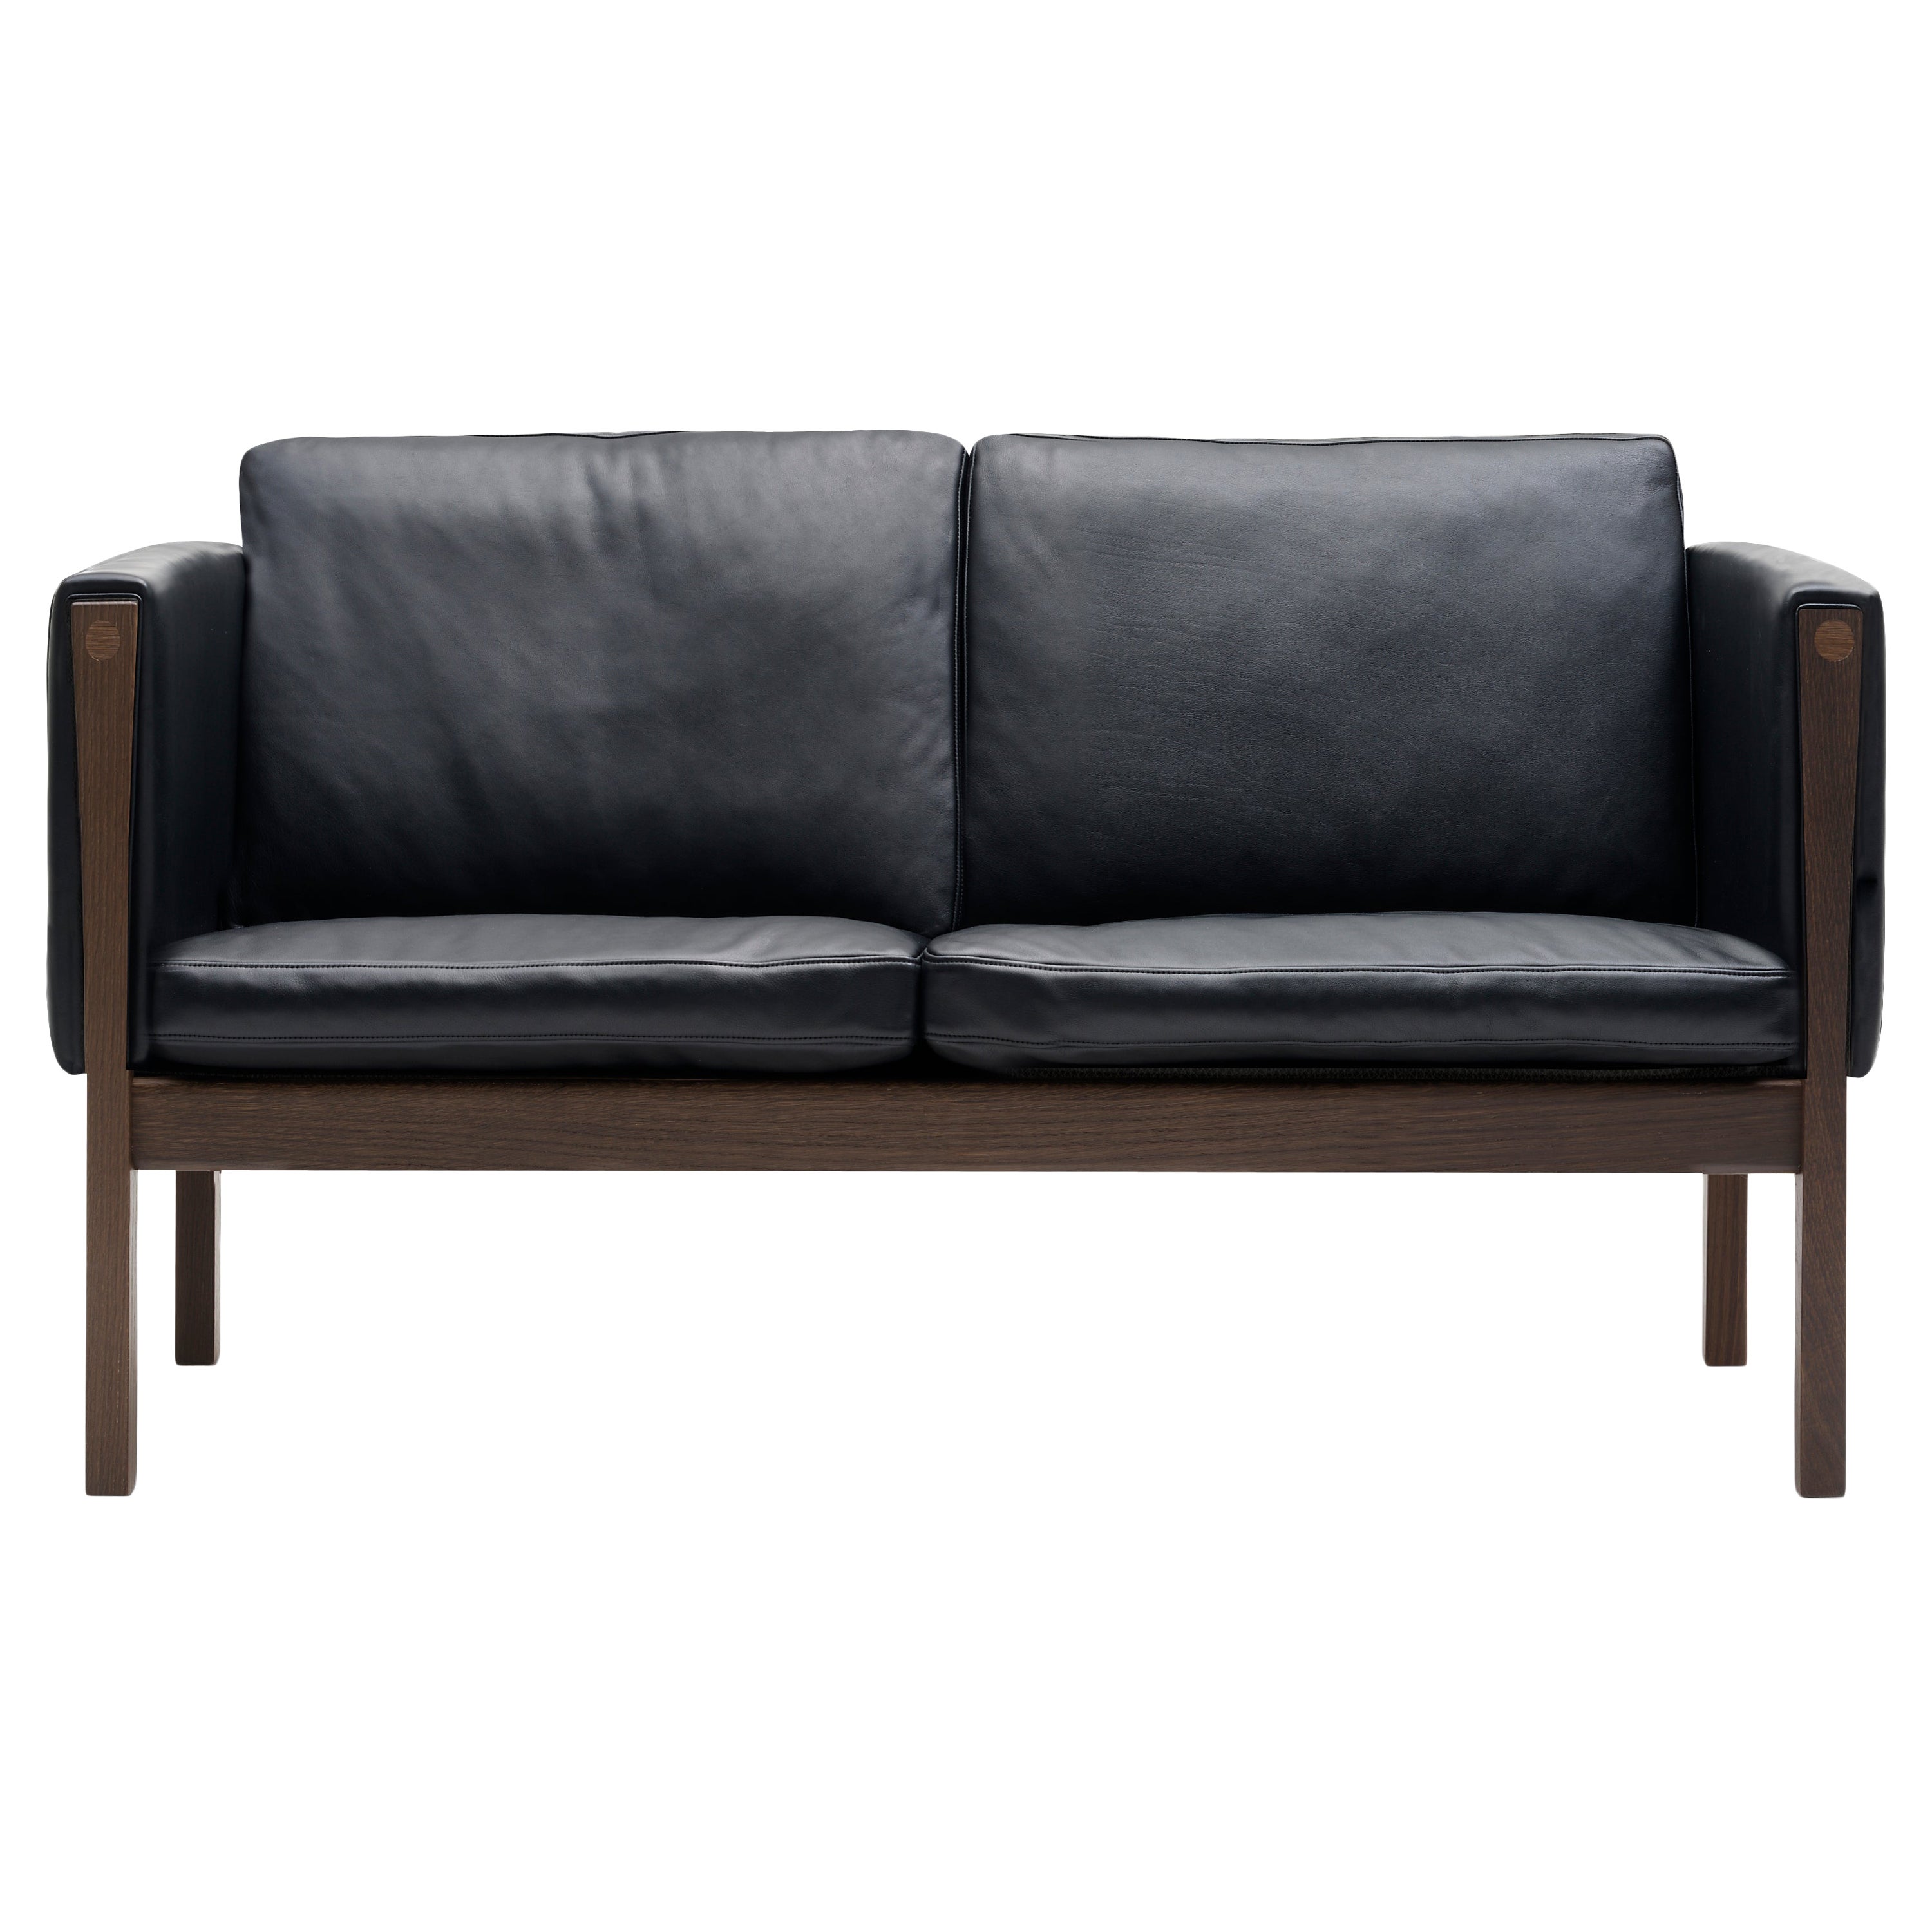 CH162 Sofa in Walnut Oil Frame with Leather Upholstery by Hans J. Wegner